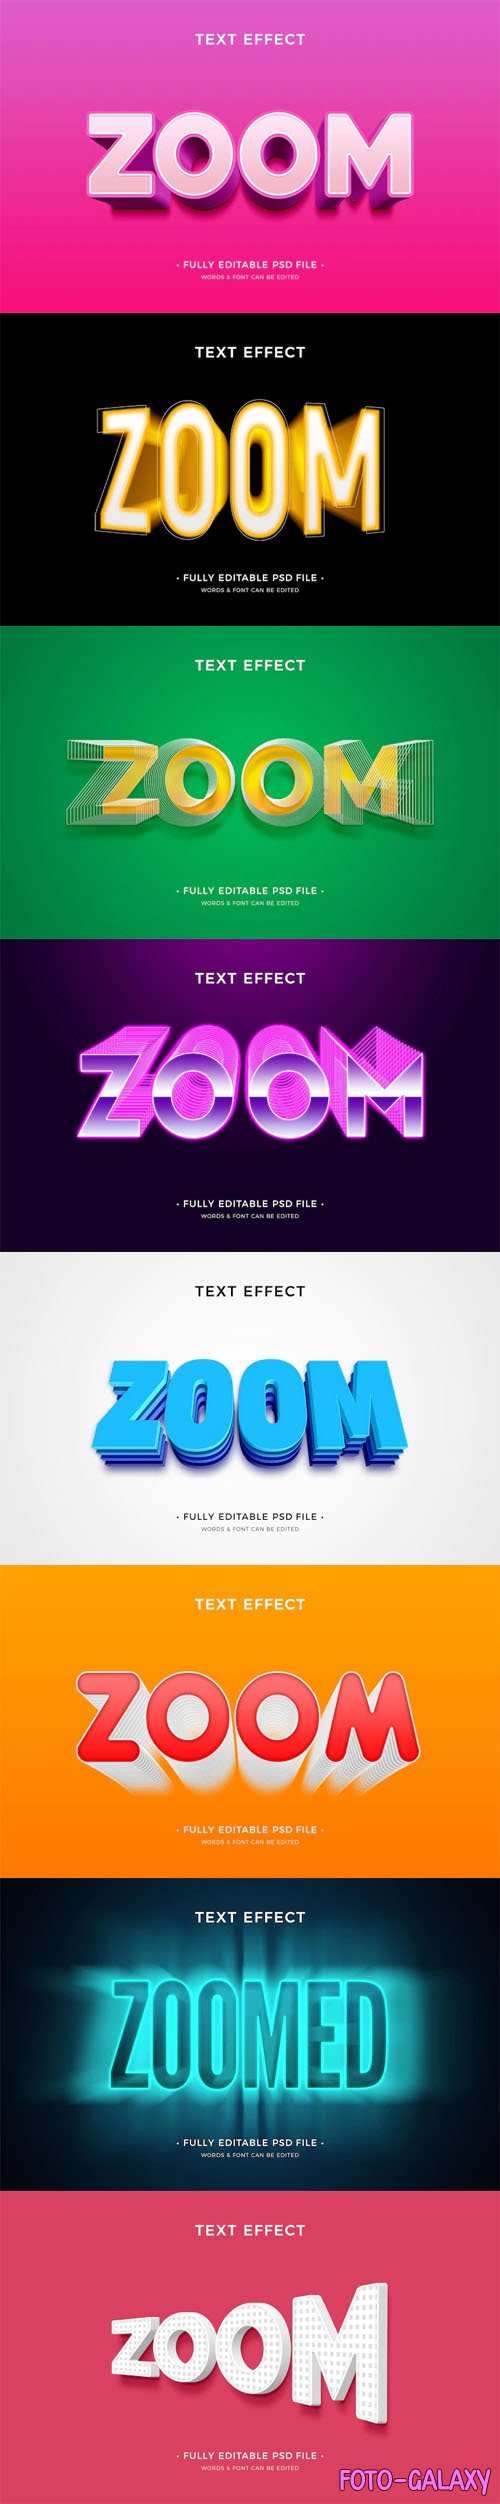 8 Zoom Text Effects Templates for Photoshop